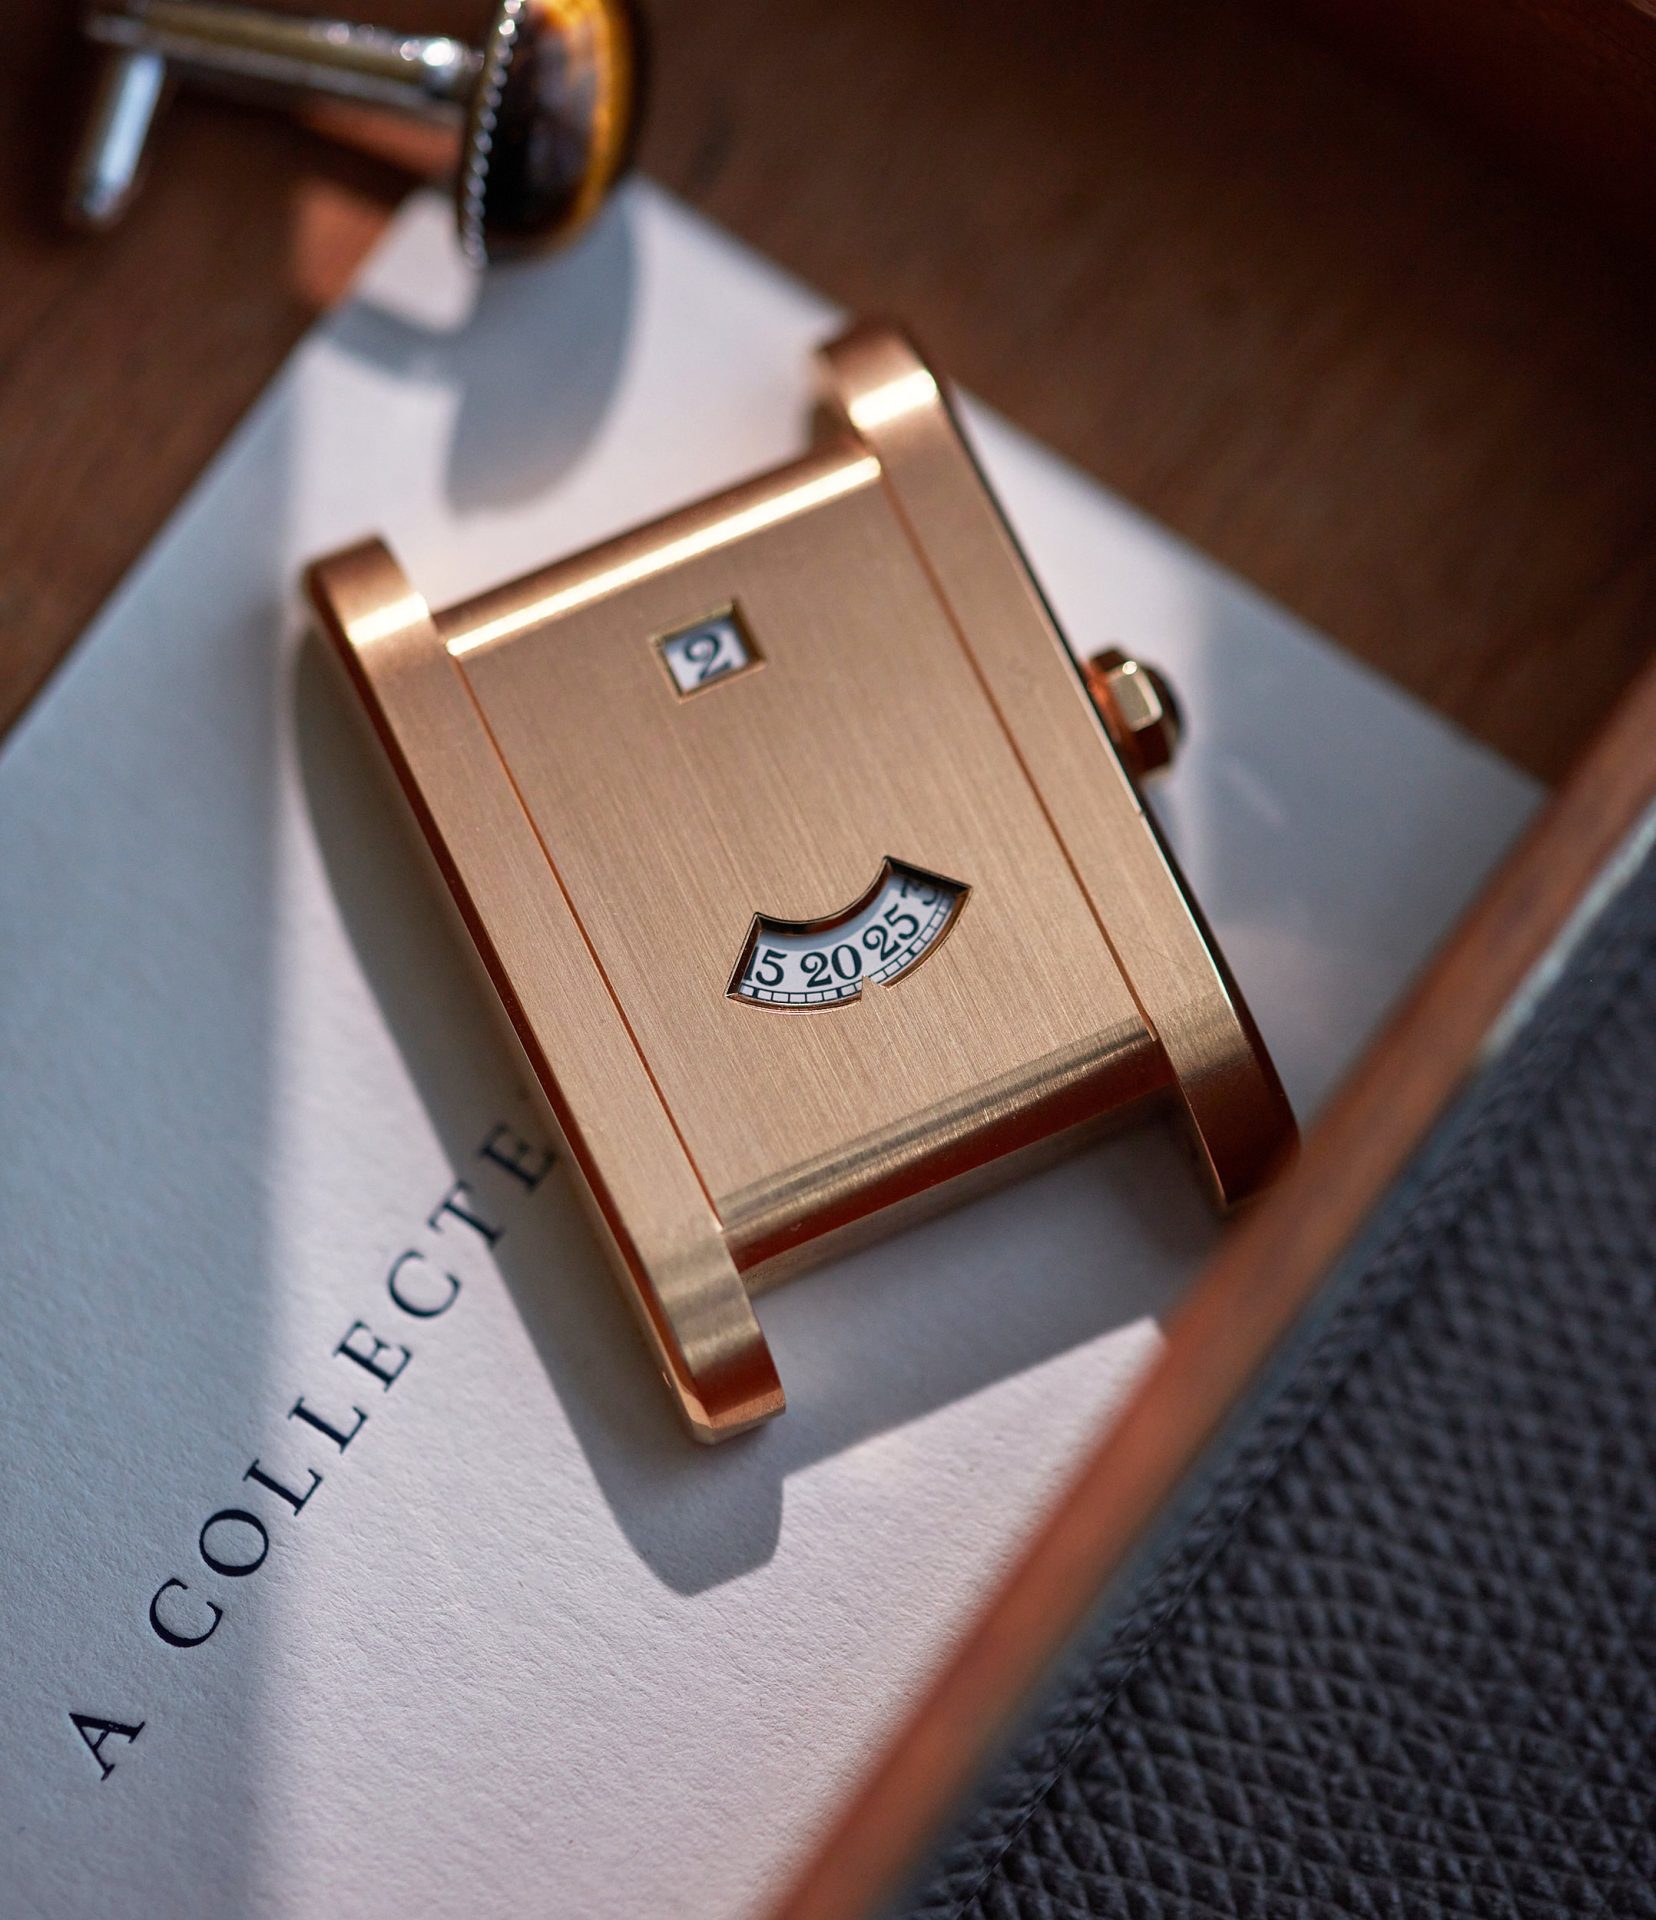 Cartier CPCP Tank à Guichets watch in rose gold on table In A Collector’s Guide to the “Collection Privée Cartier Paris” for A Collected Man London